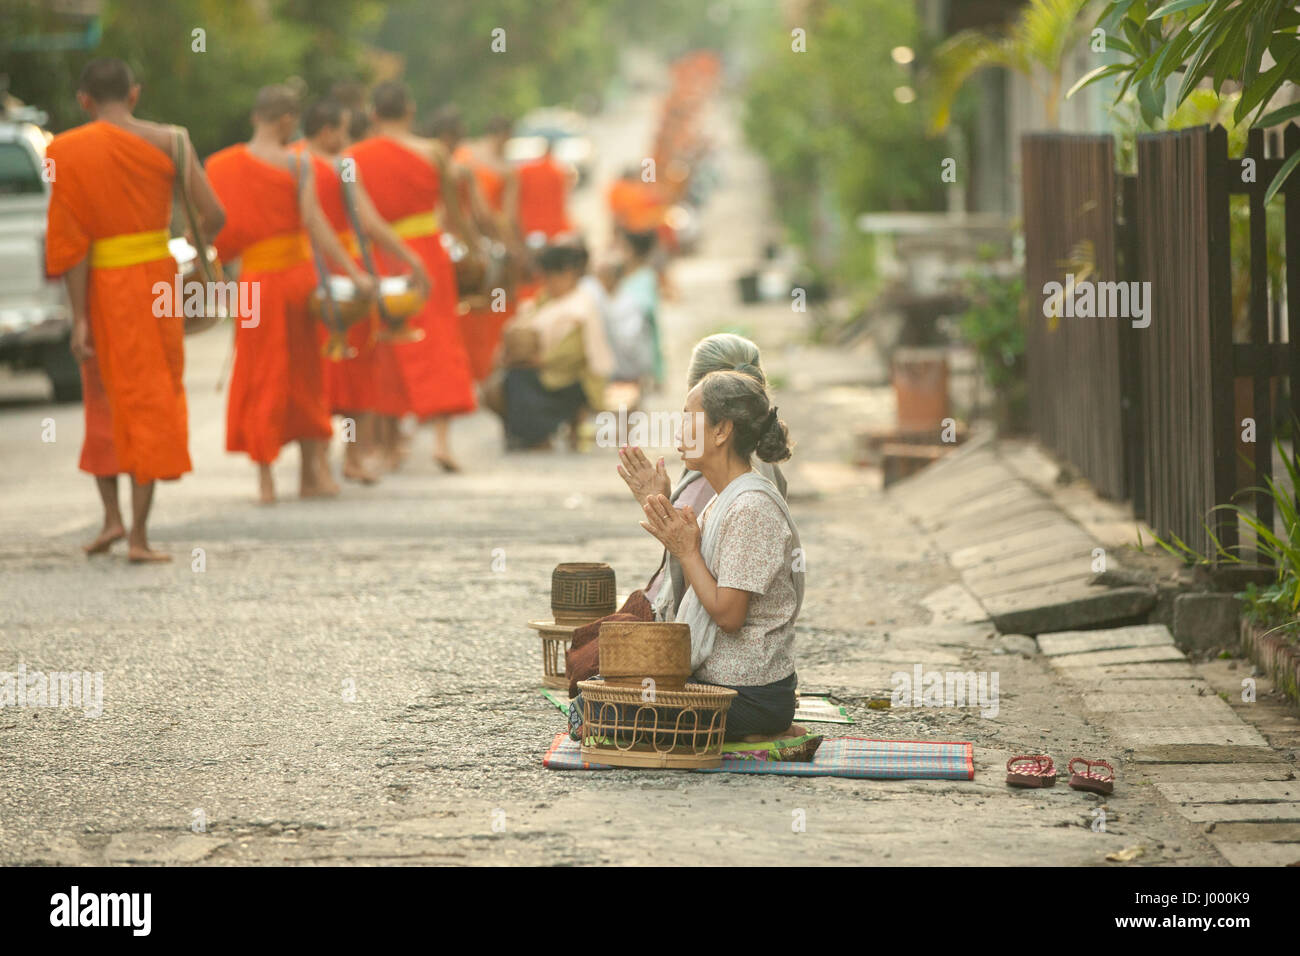 Lao People's Democratic Republic, Laos, Luang Prabang - 20 JUNE 2014: Woman prays after giving alms to buddhist monks on the street. Stock Photo